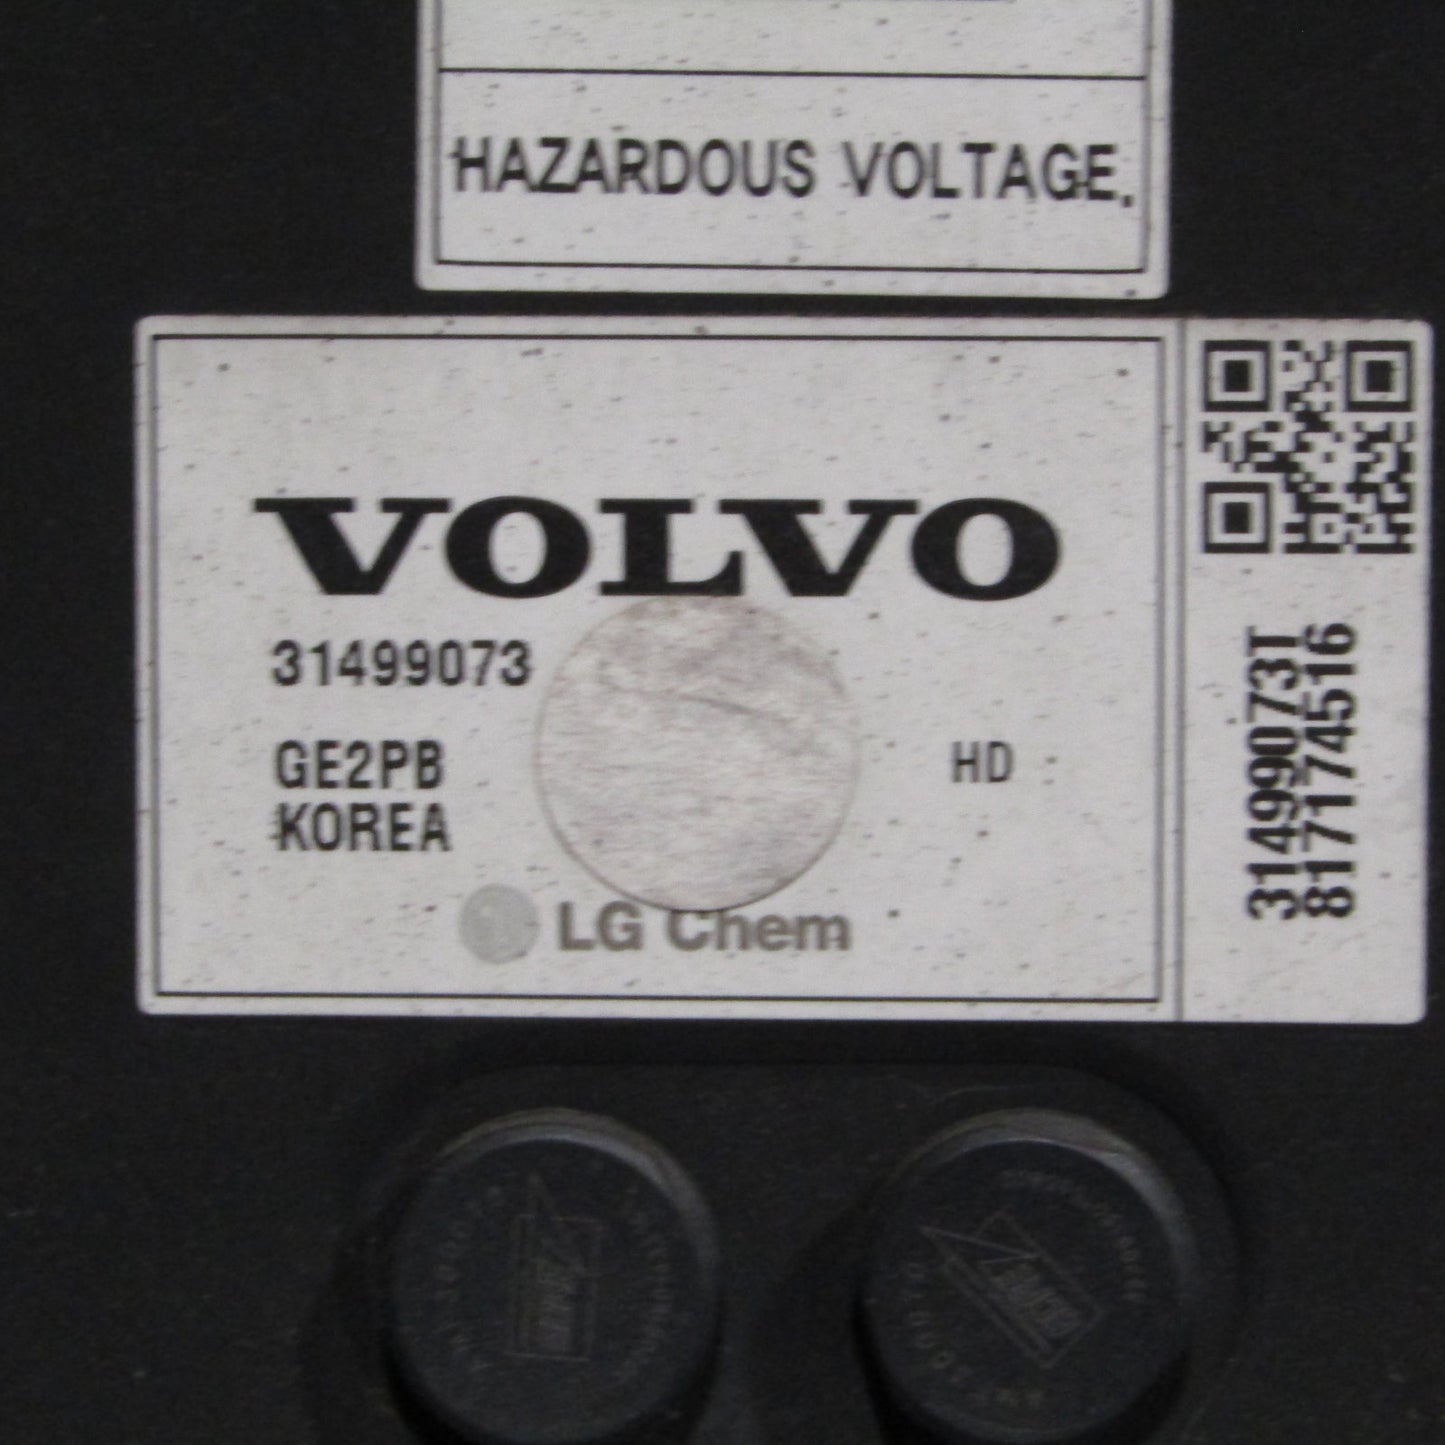 Volvo XC90 / 18.8 kWh / Battery Pack - with Damaged Plugs